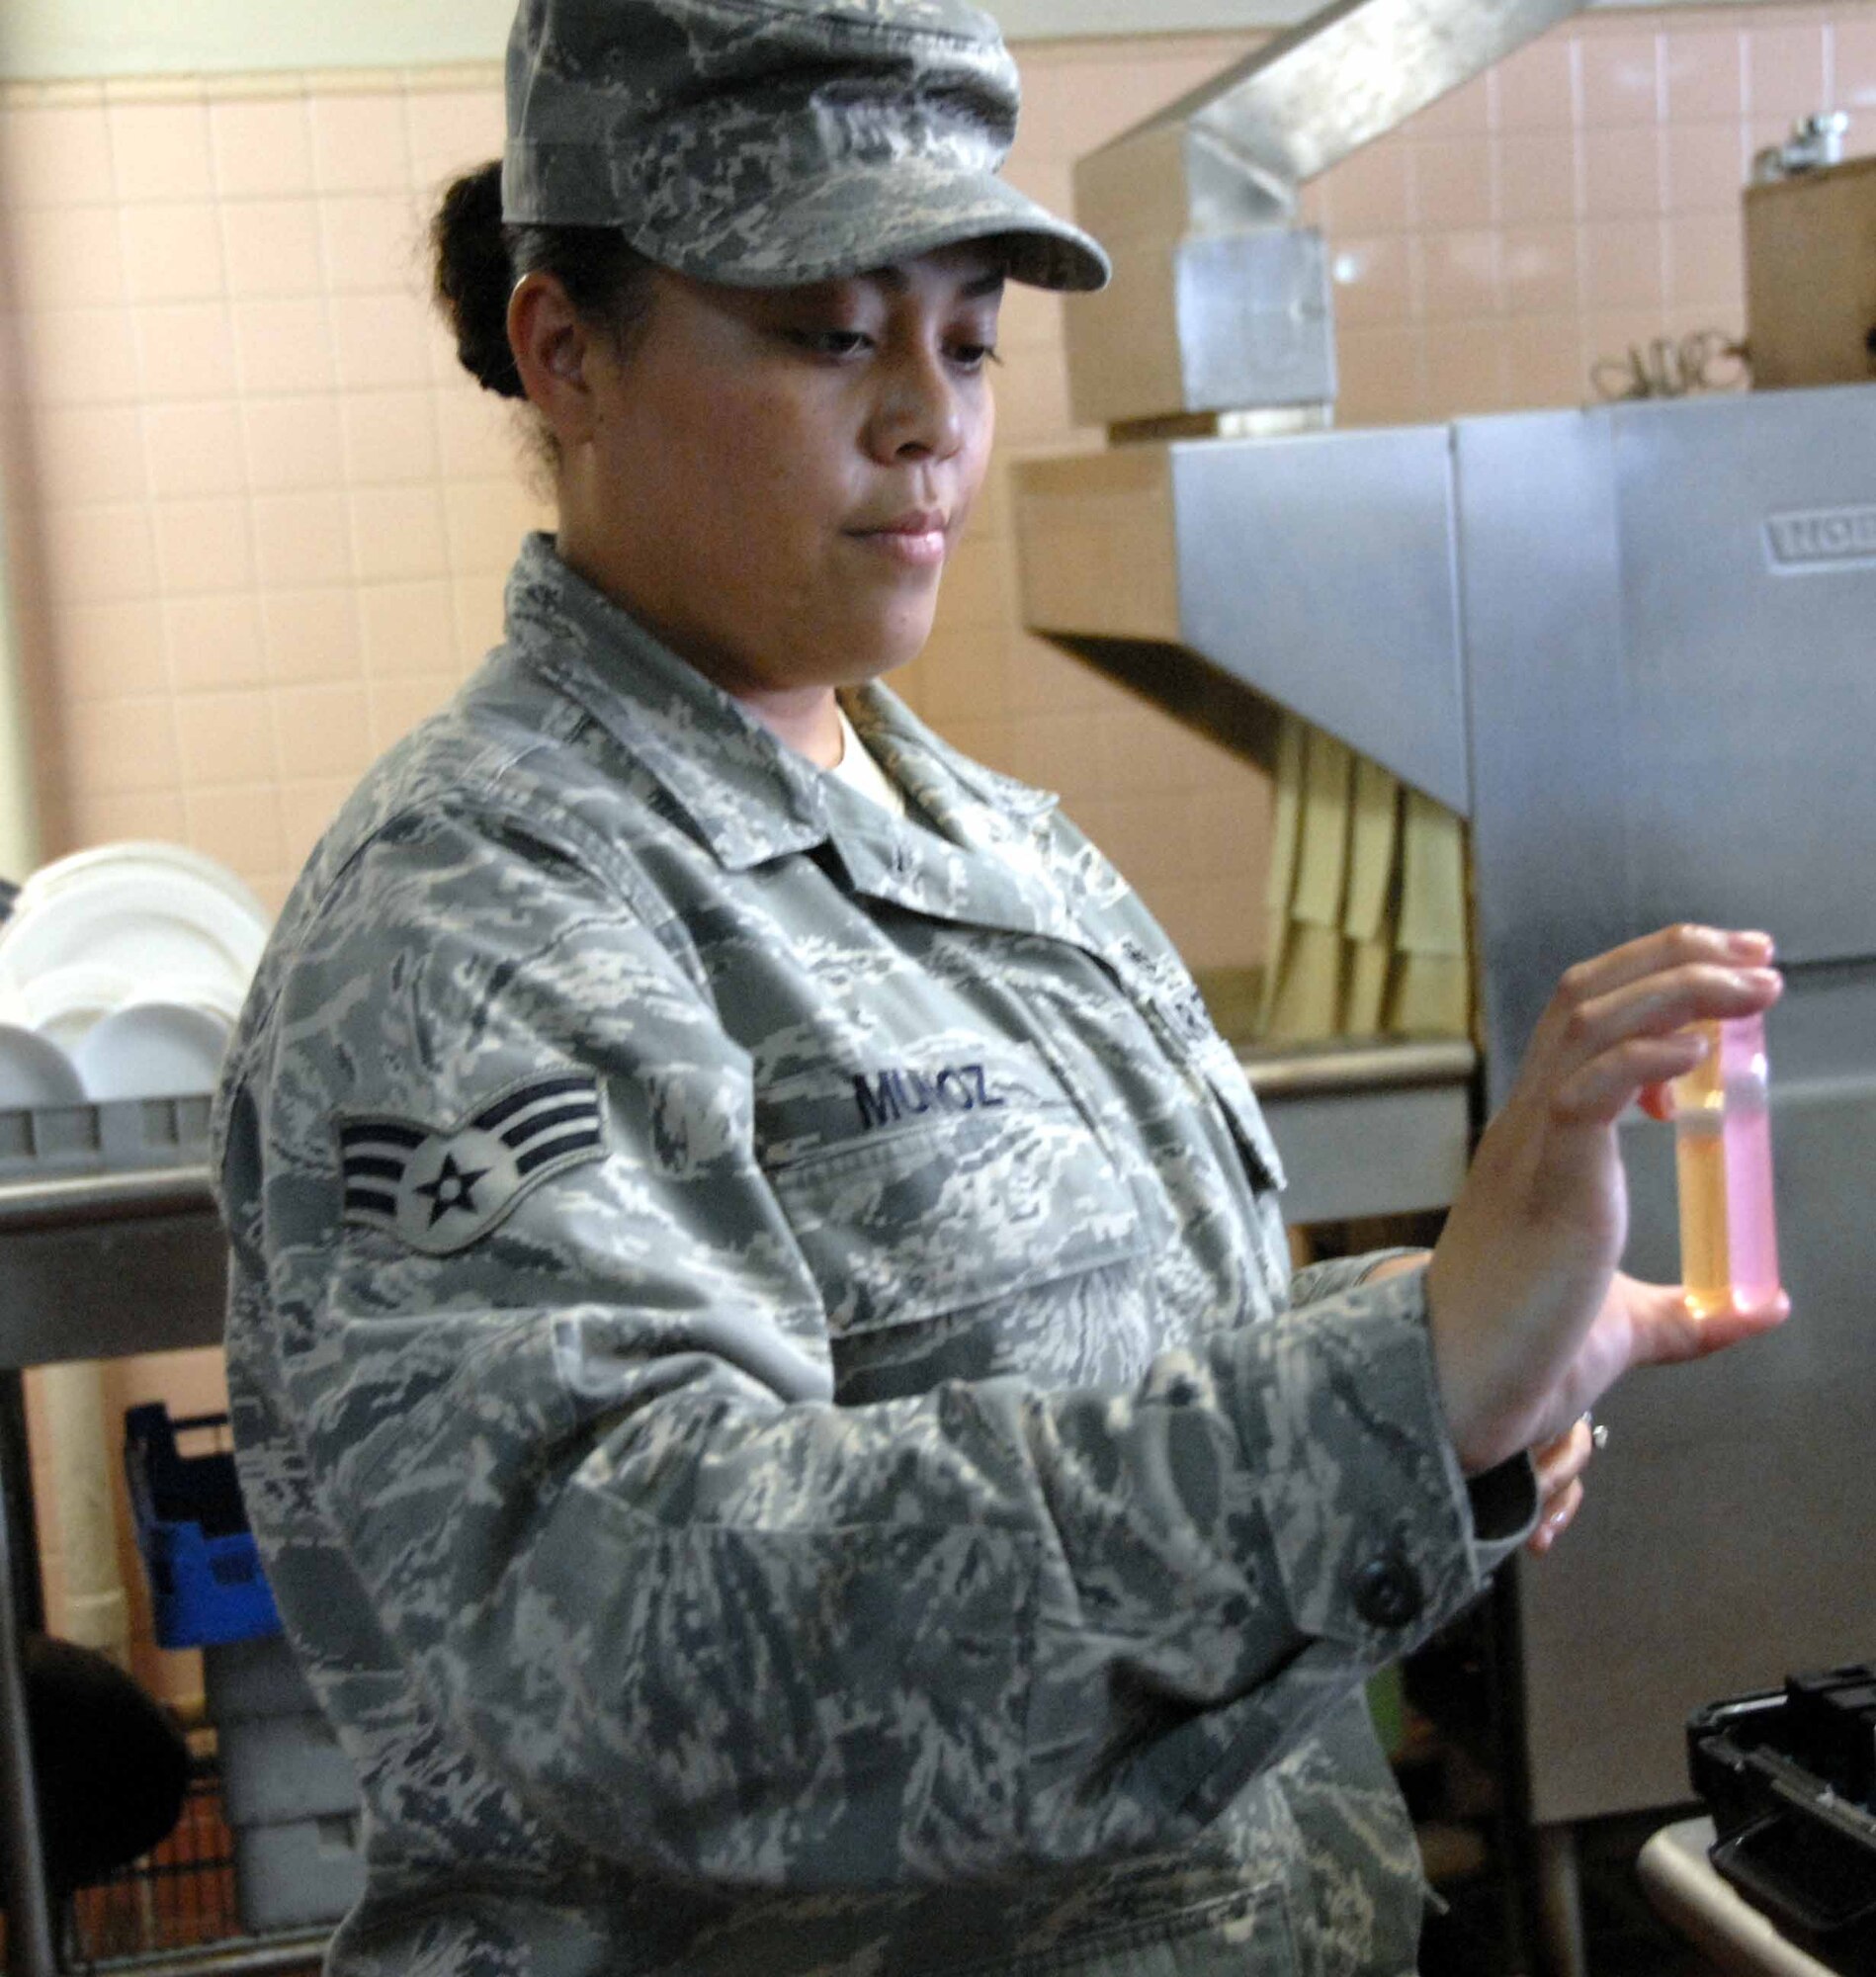 OSAN AIR BASE, Republic of Korea -- Senior Airman Verna Munoz, 51st Aerospace Medicine Squadron Bioenvironmental Engineering technician, compares water samples taken at the Challenger Club. The Bioenvironmental Engineering Flight determined that Osan's tap water met all U.S. Environmental Protection Agency and Korean Environmental Governing Standards drinking water health standards, thus it is safe for consumption. (U.S. Air Force photo/Staff Sgt. Candy Knight)